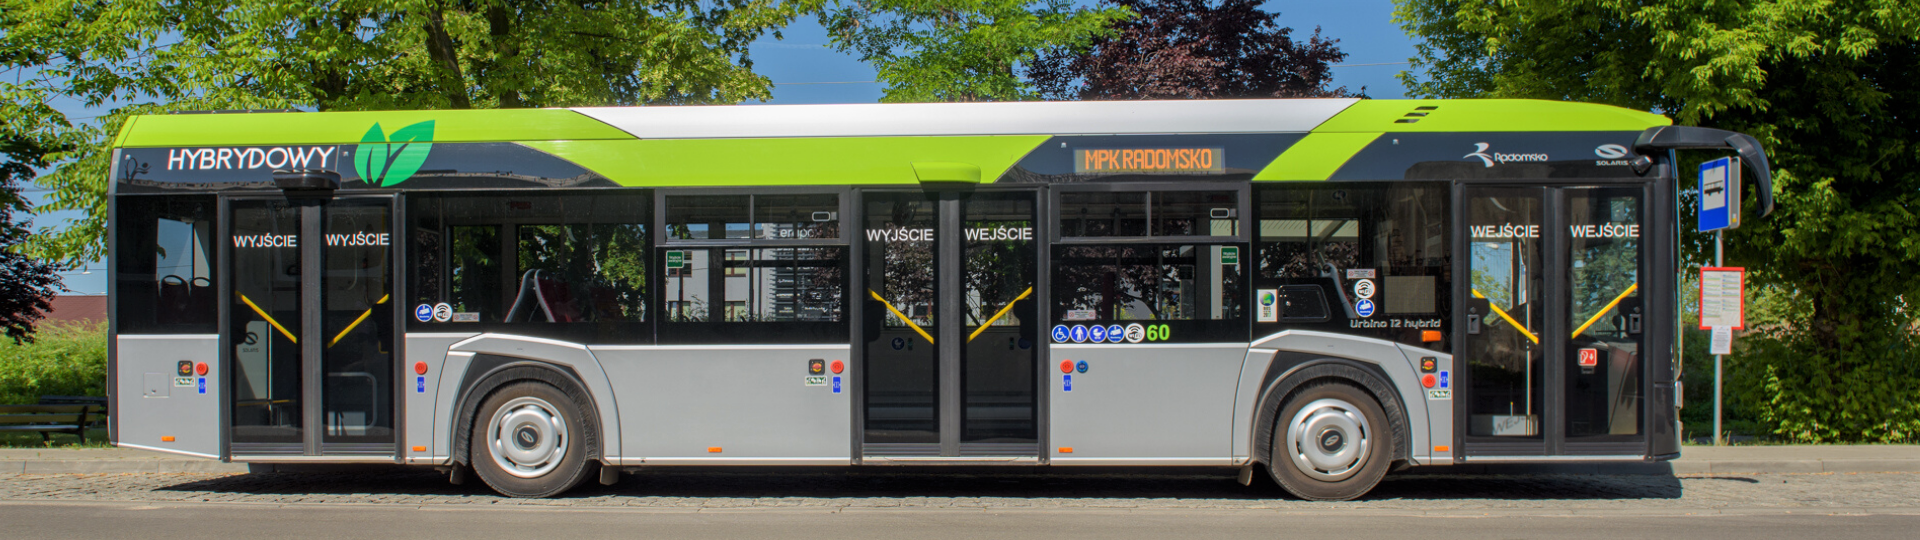 Satu Mare in Romania gets innovative Solaris-made low-emission hybrid buses